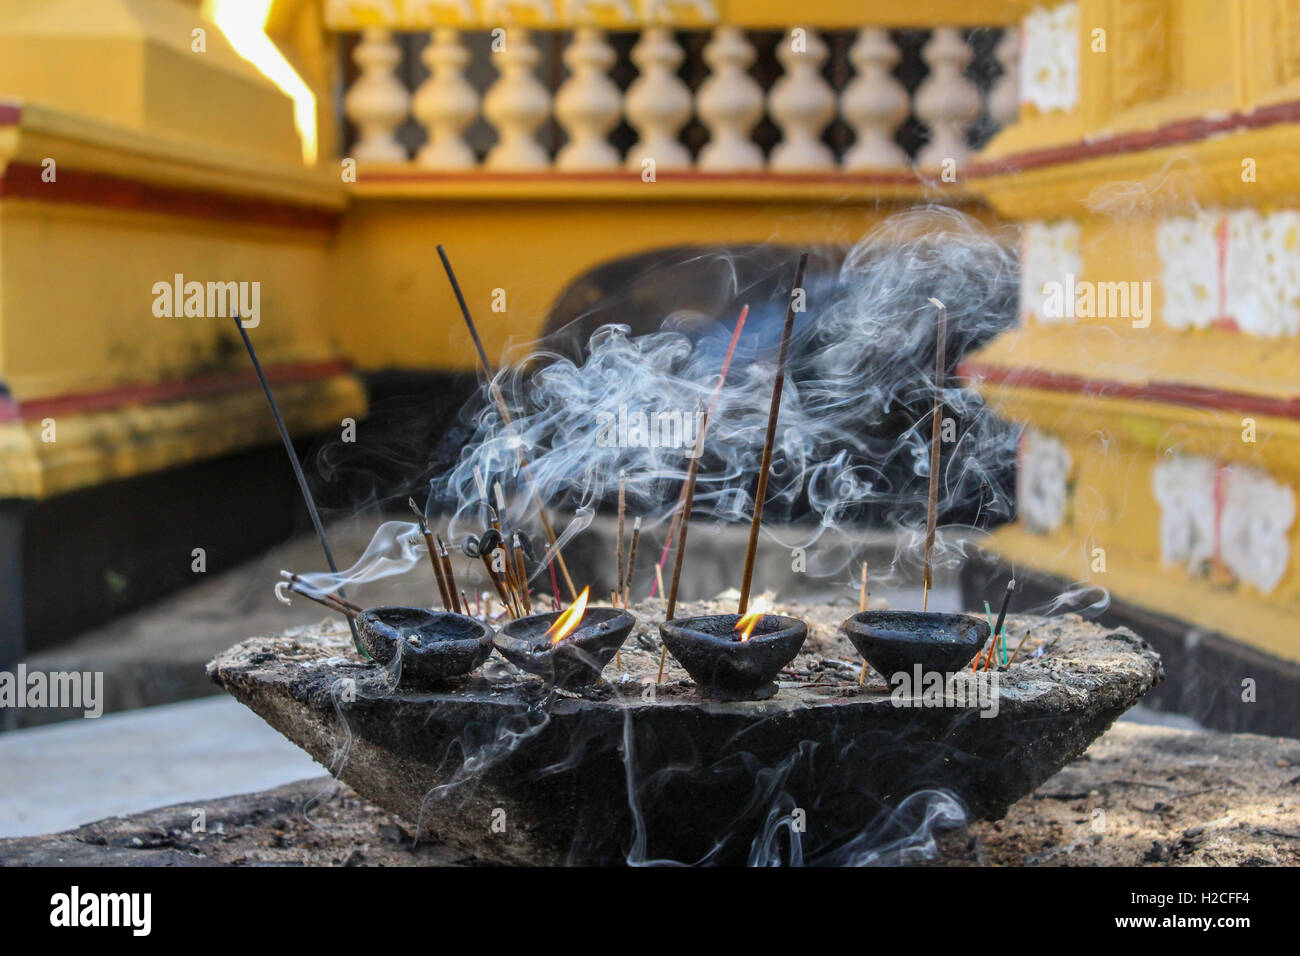 Incense Burning and Oil Lamps Spirituality at Buddhist Temple Stock Photo